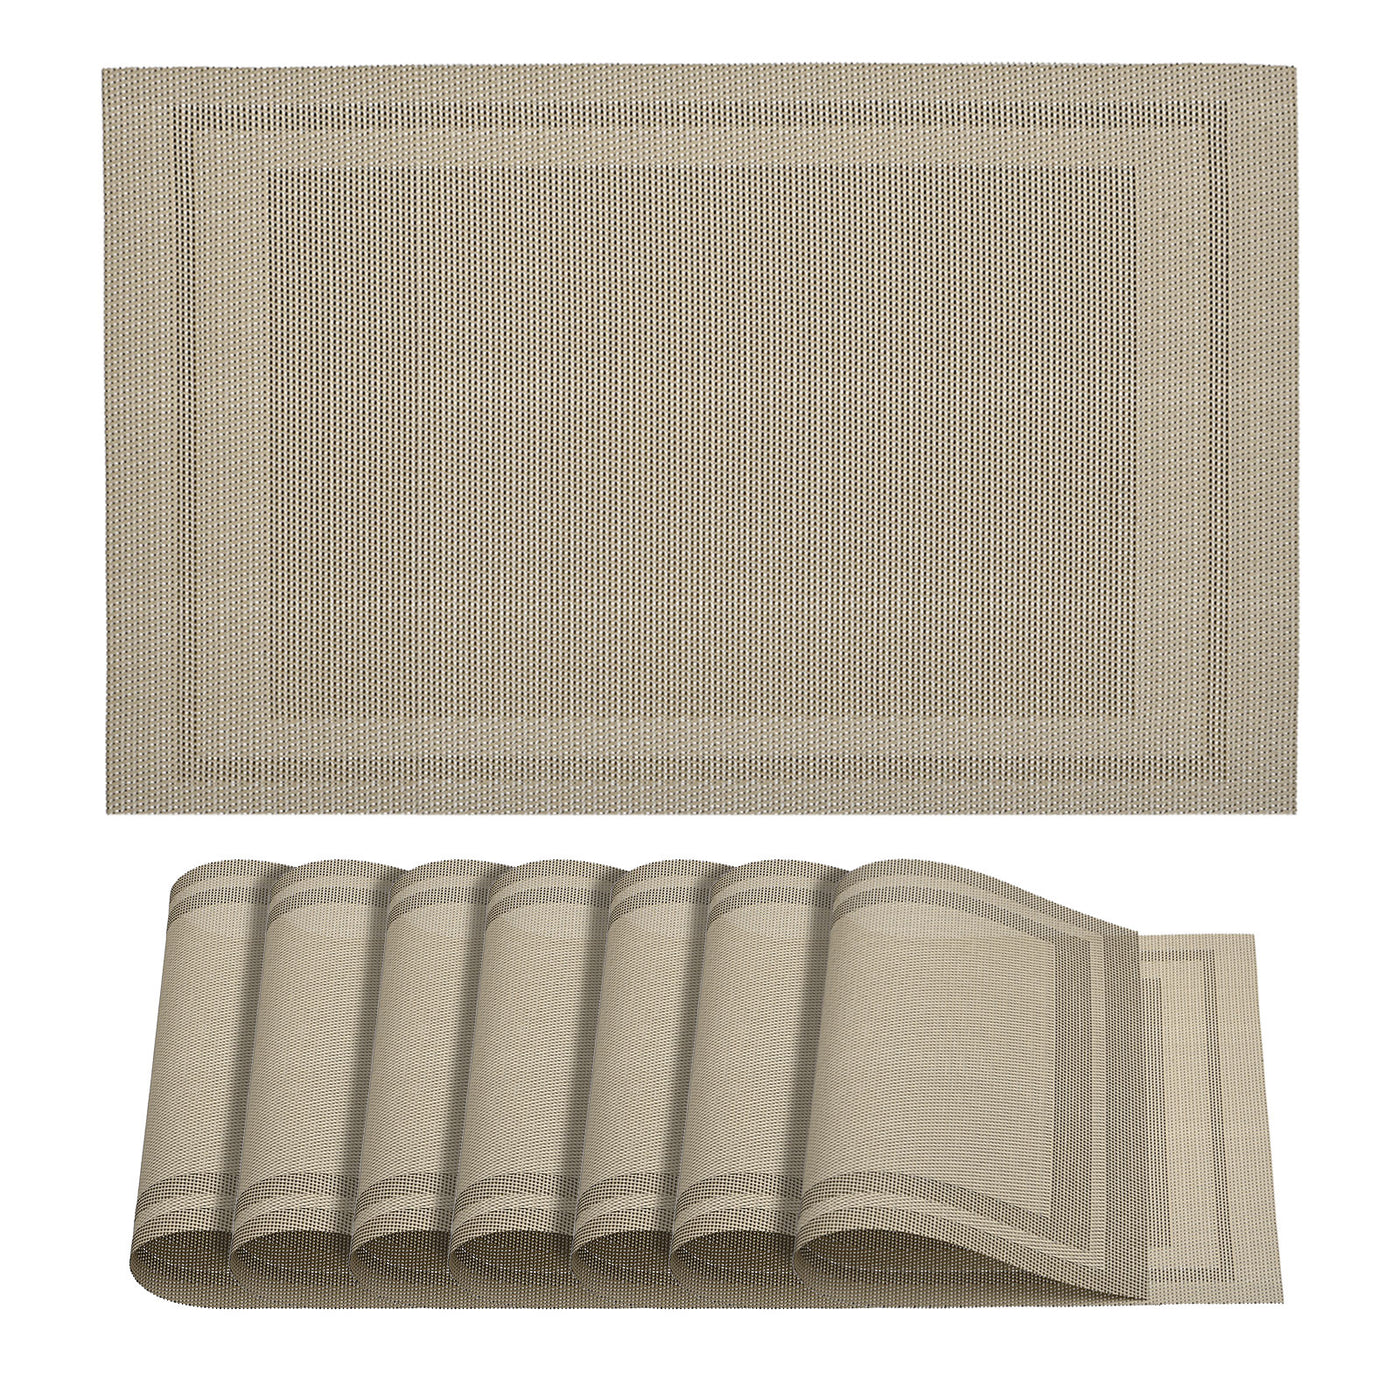 uxcell Uxcell Place Mats, 450x300mm Table Mats Set of 8 PVC Washable Woven Placemat Khaki